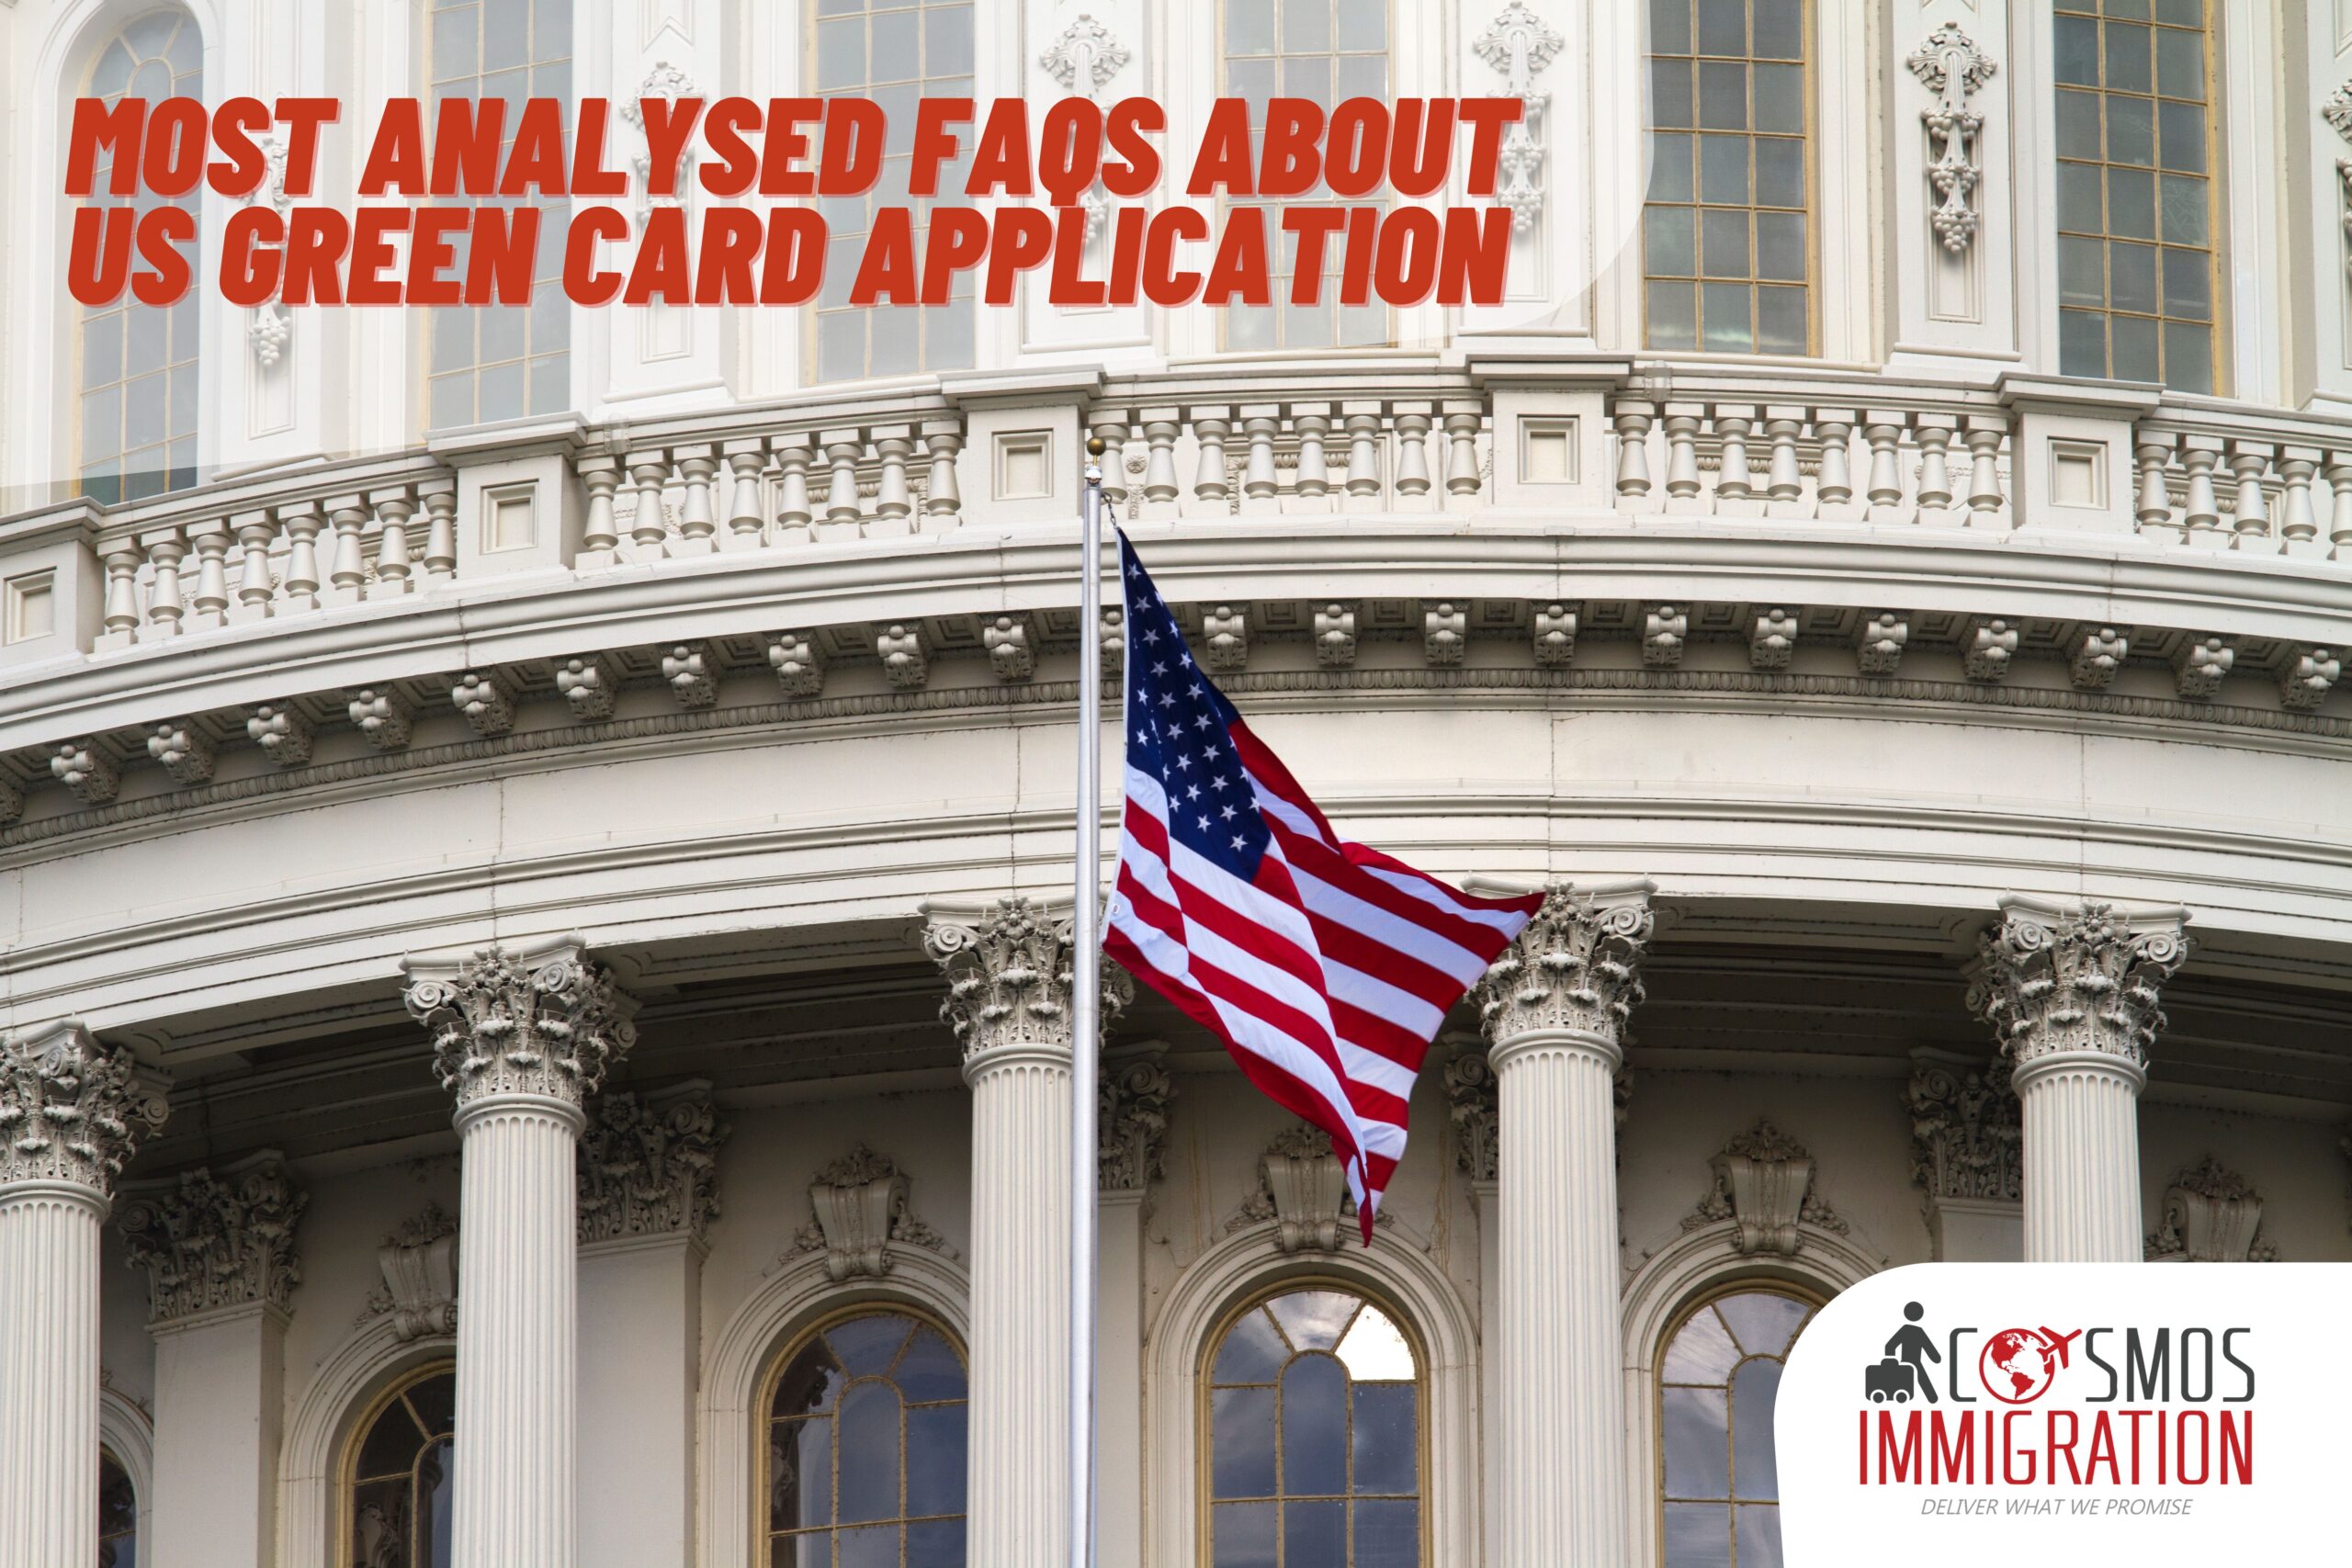 Most Analyzed FAQs About US Green Card Application